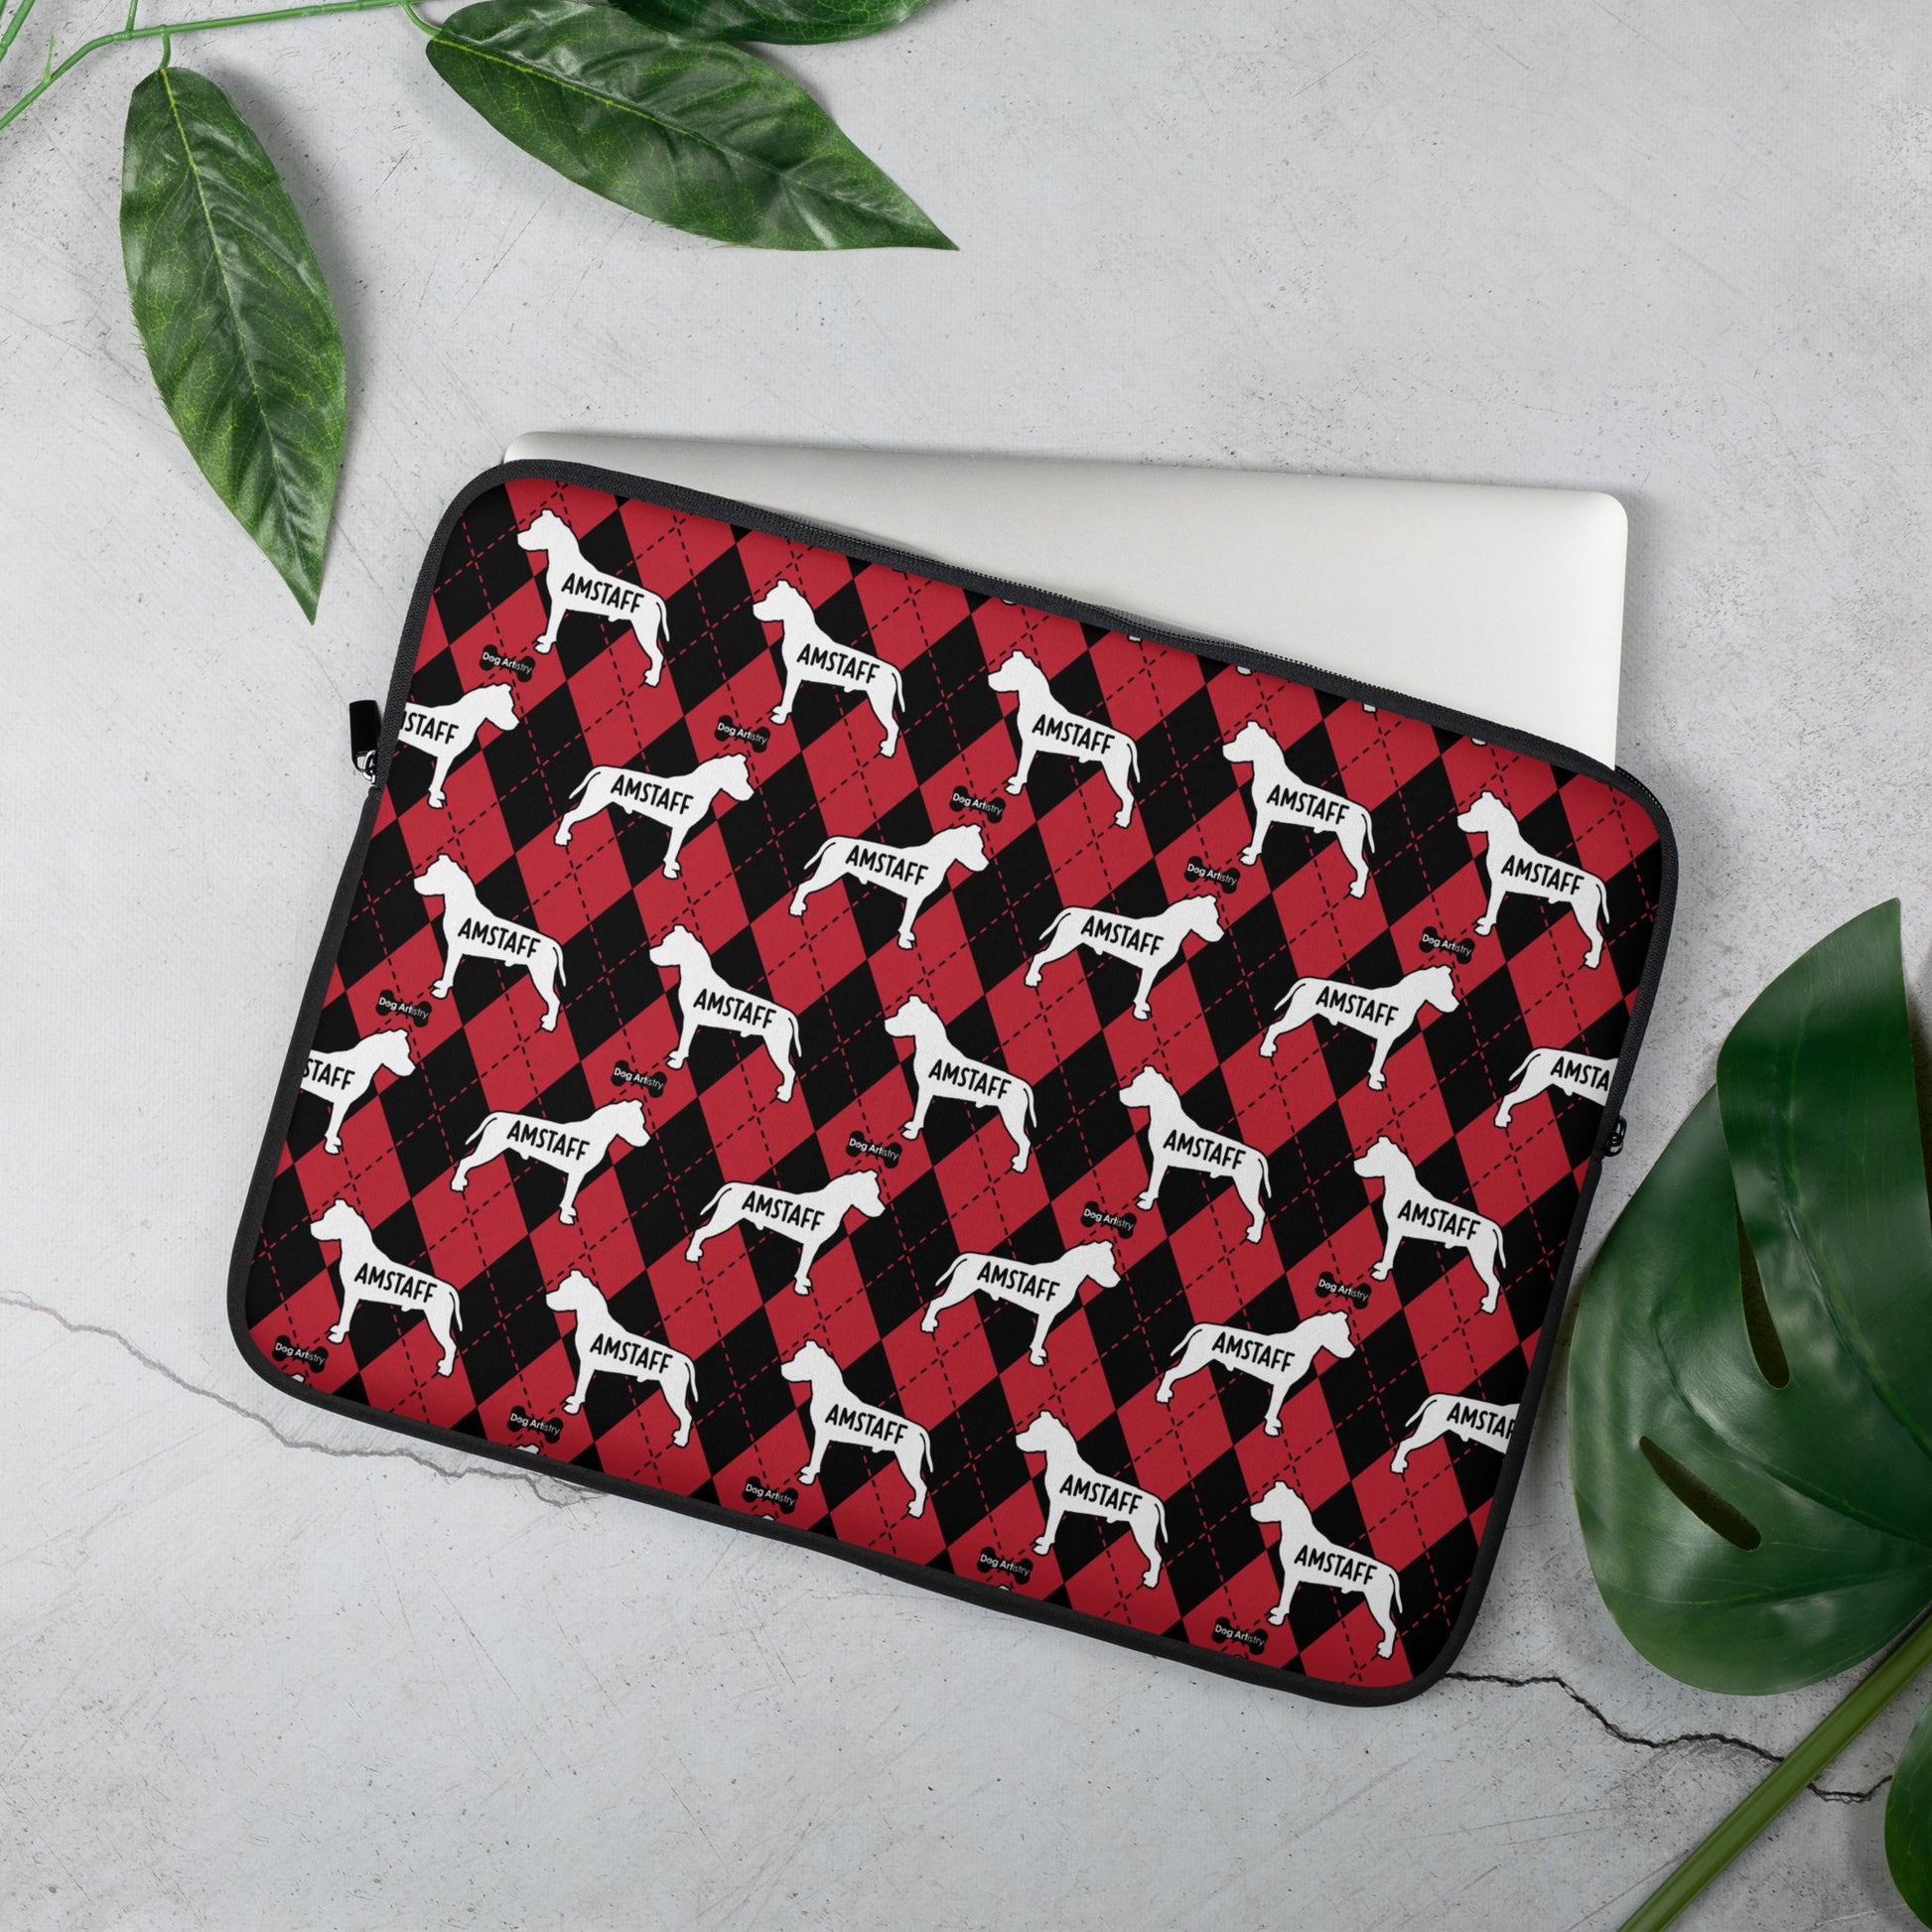 Amstaff red and black argyle laptop sleeve by Dog Artistry